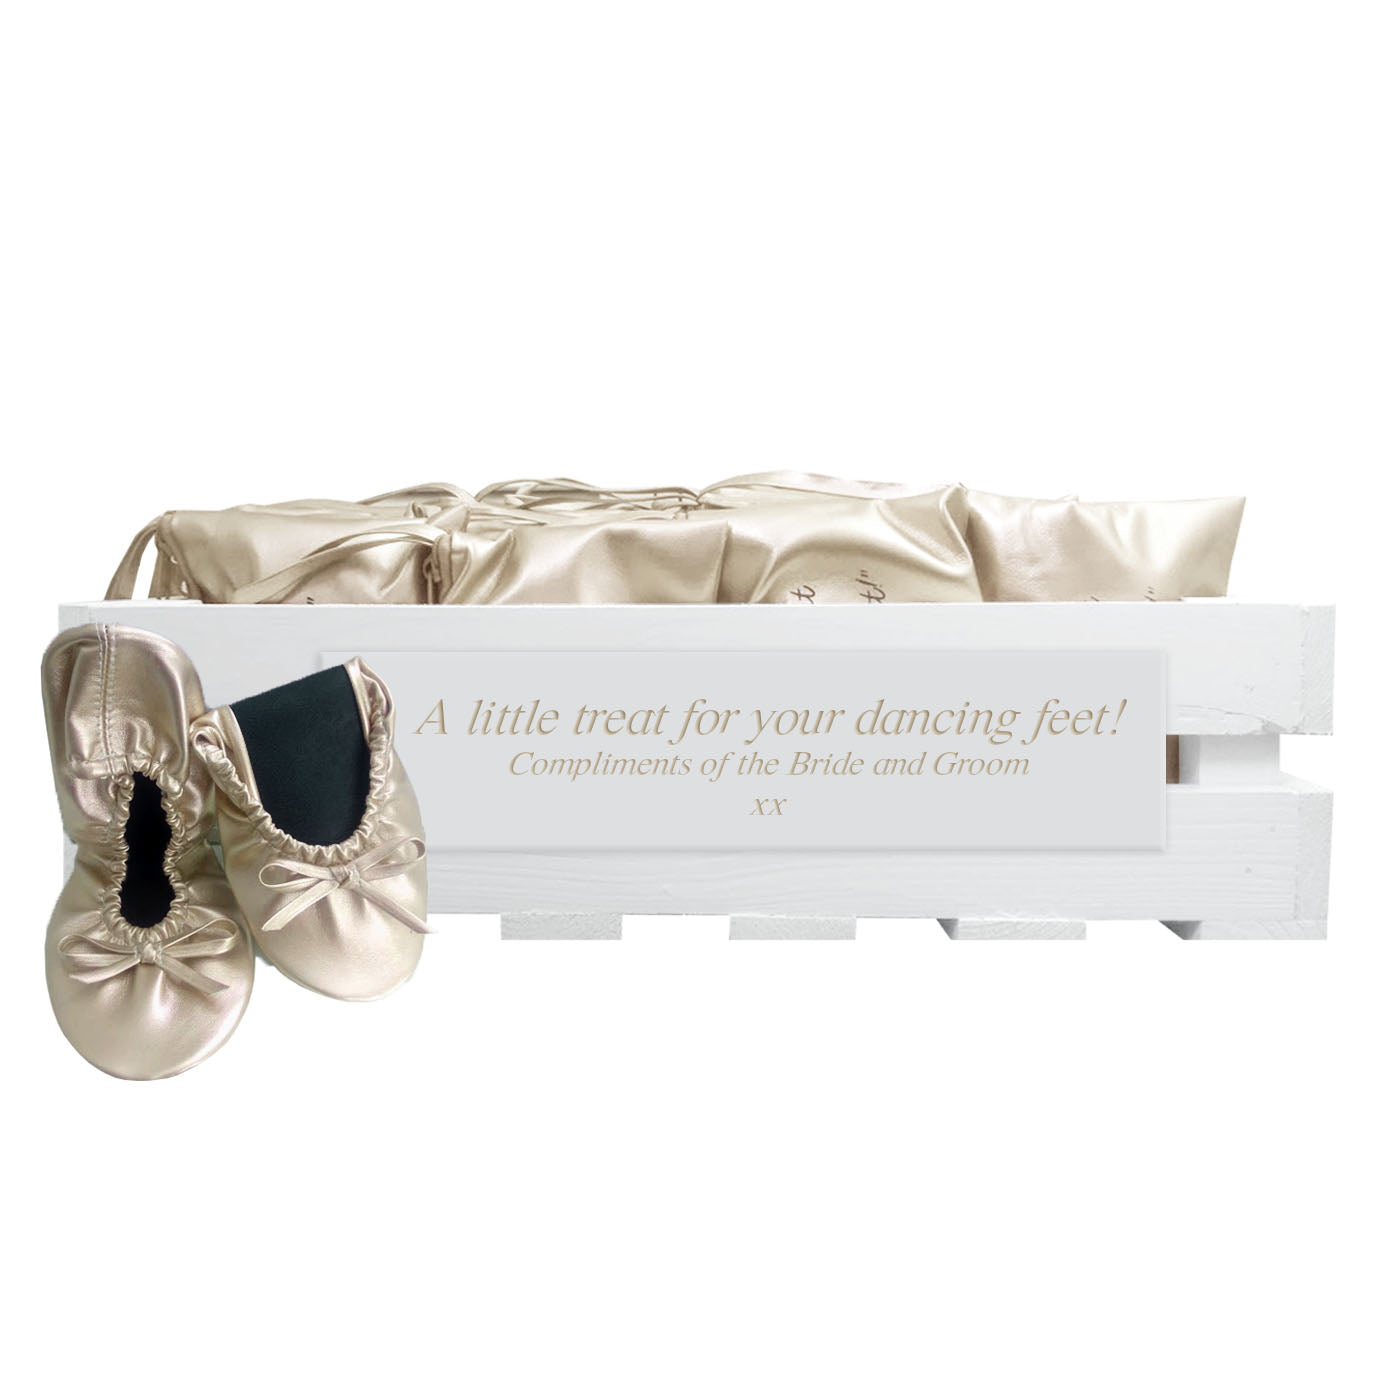 30 pairs of gold fold-up ballerinas in a personalized crate